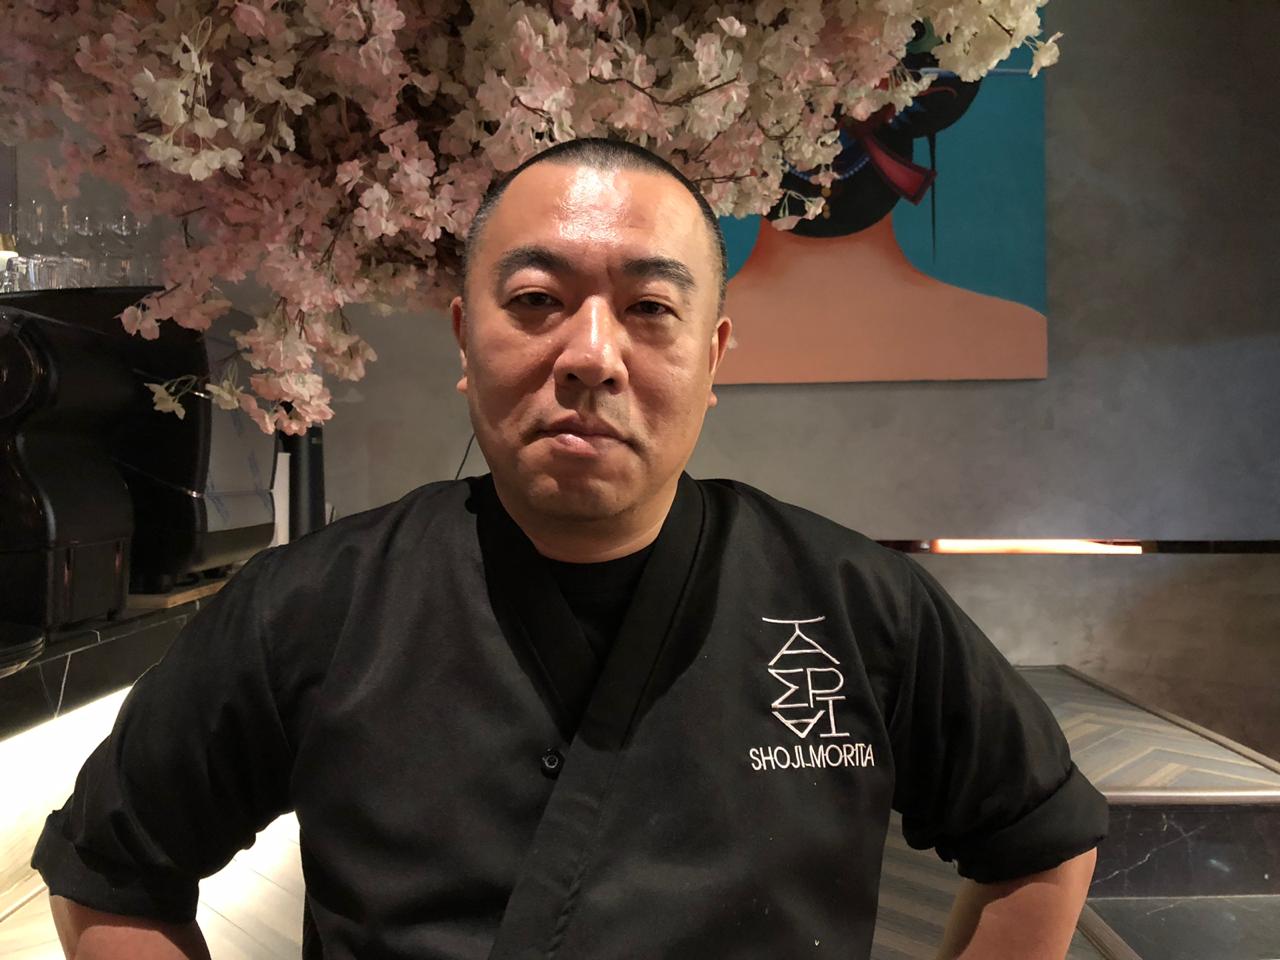 Morita, an alumnus of the Tokya Culinary School, Japan, has worked in Japan, Canada, South Africa, Greece, Hungary, Russia, Norway, Monaco and Bangladesh before coming to India